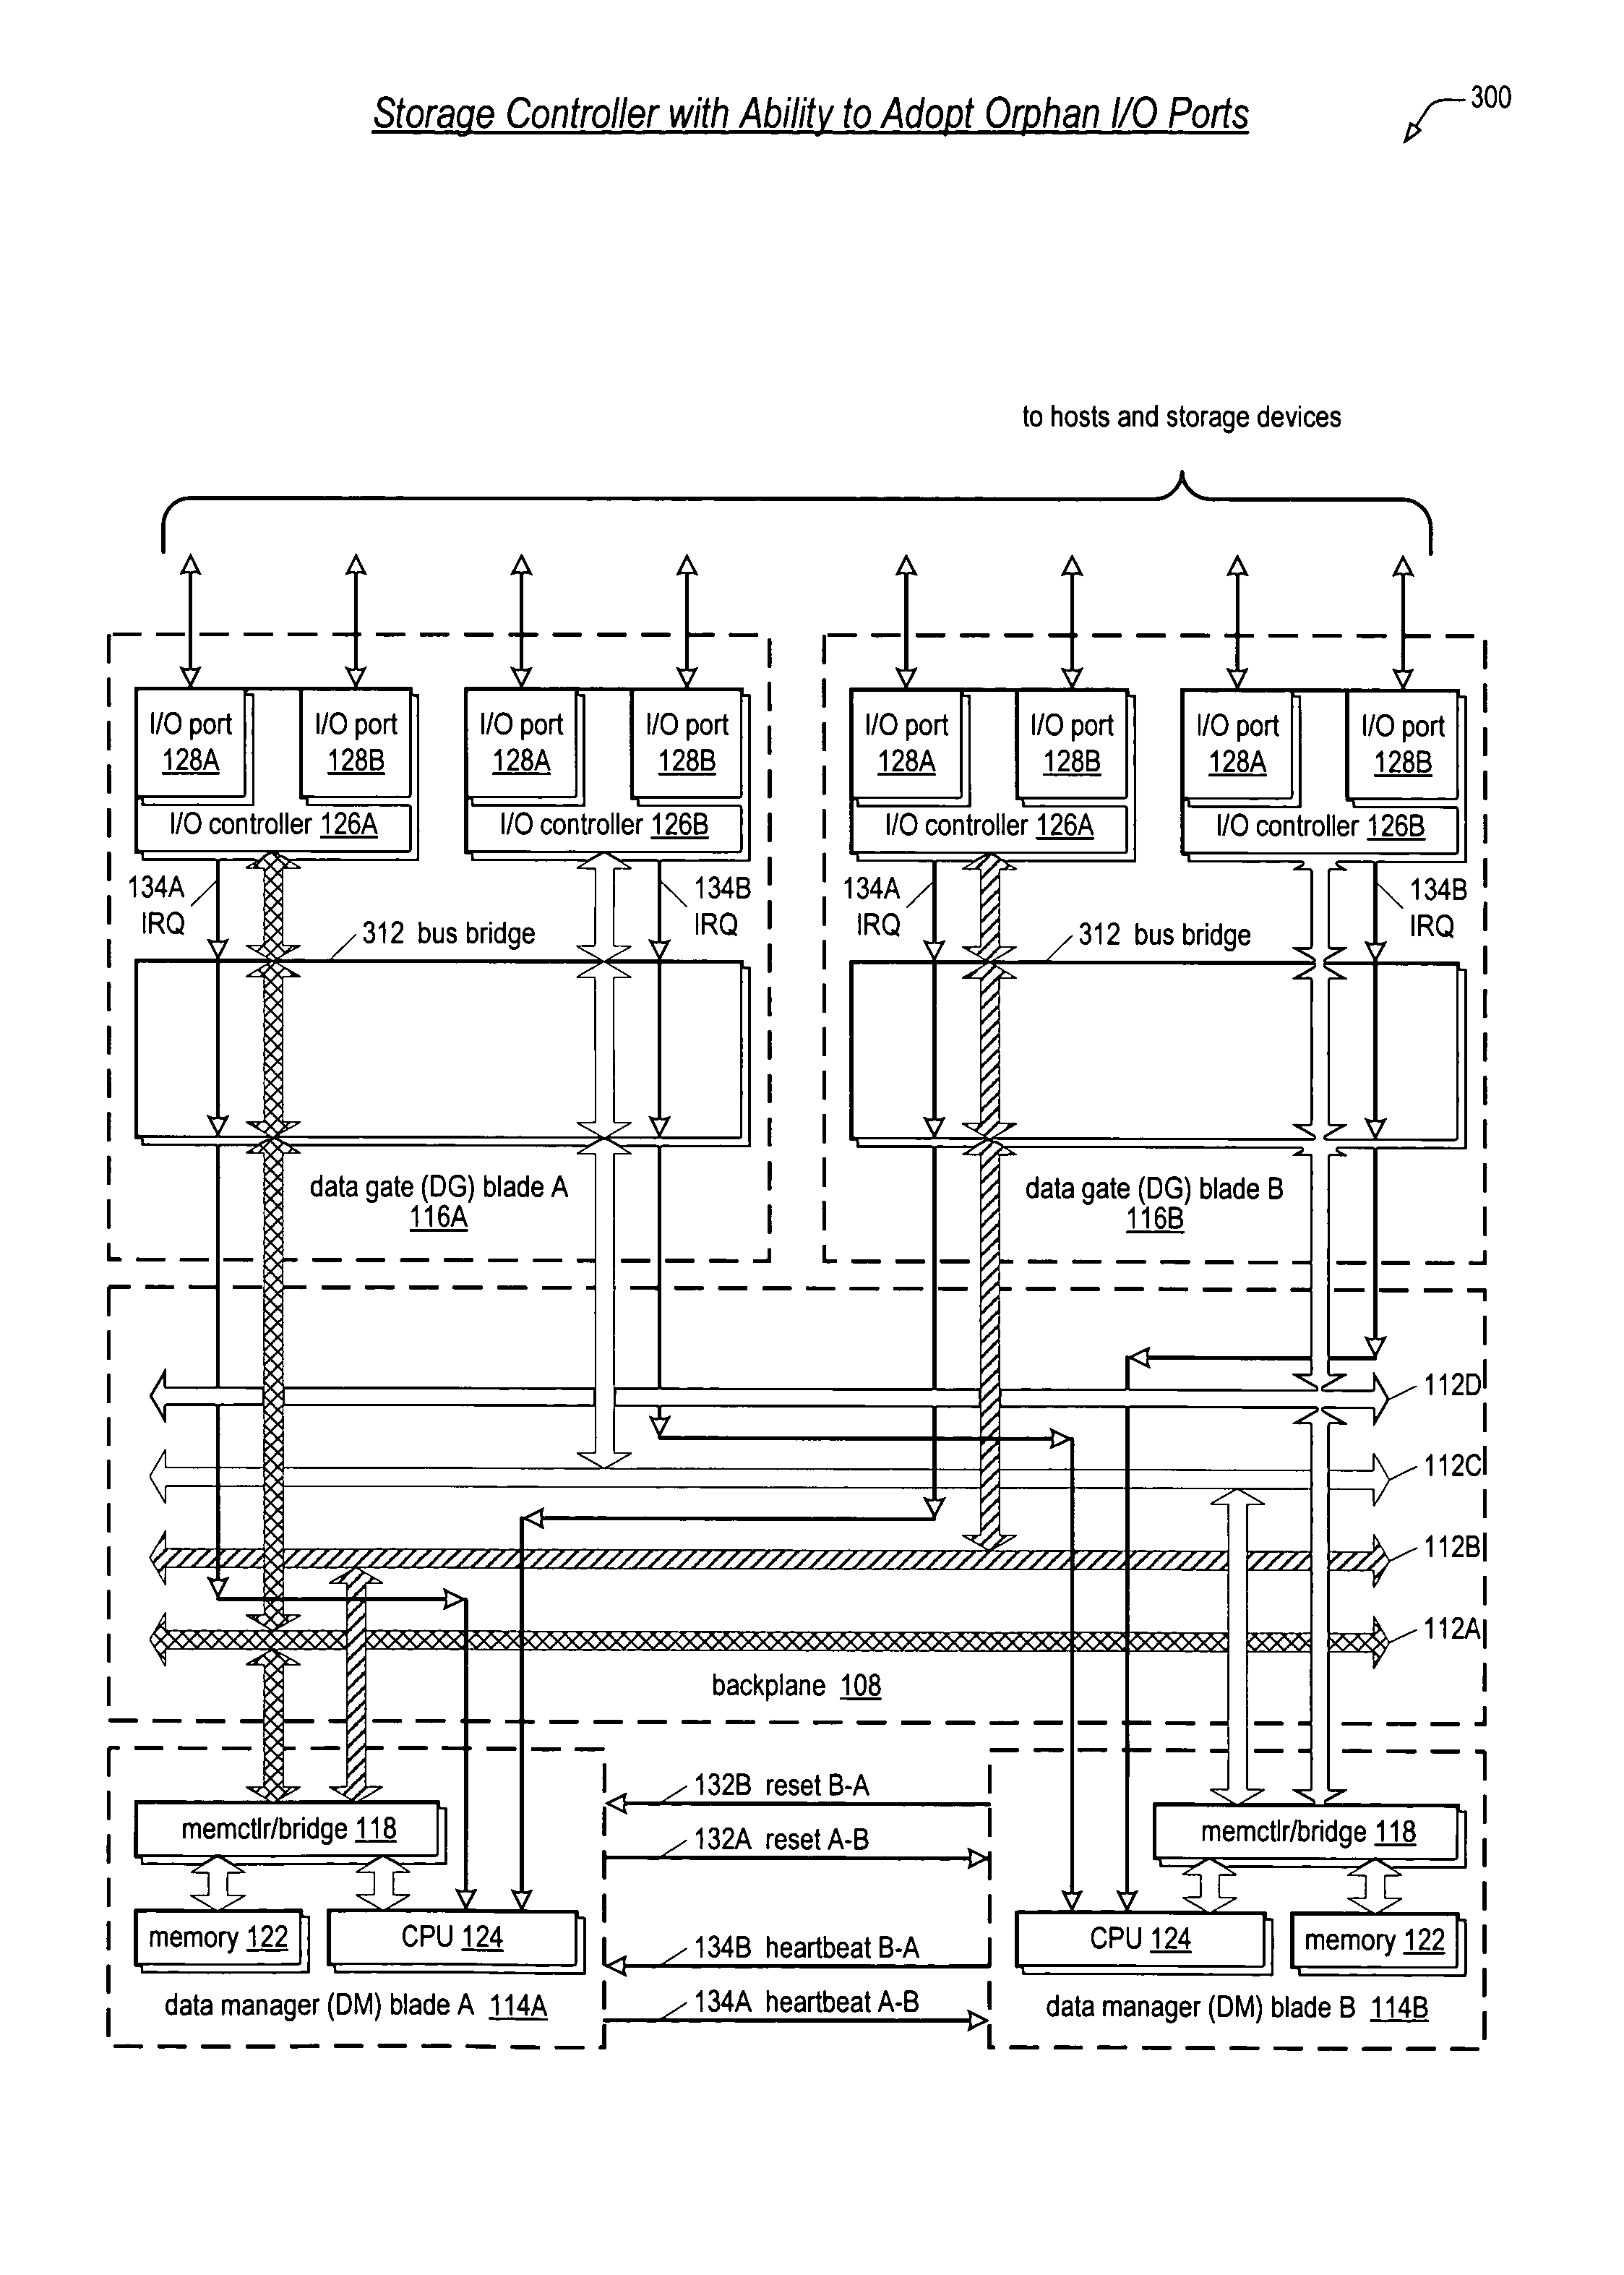 Apparatus and method for adopting an orphan I/O port in a redundant storage controller